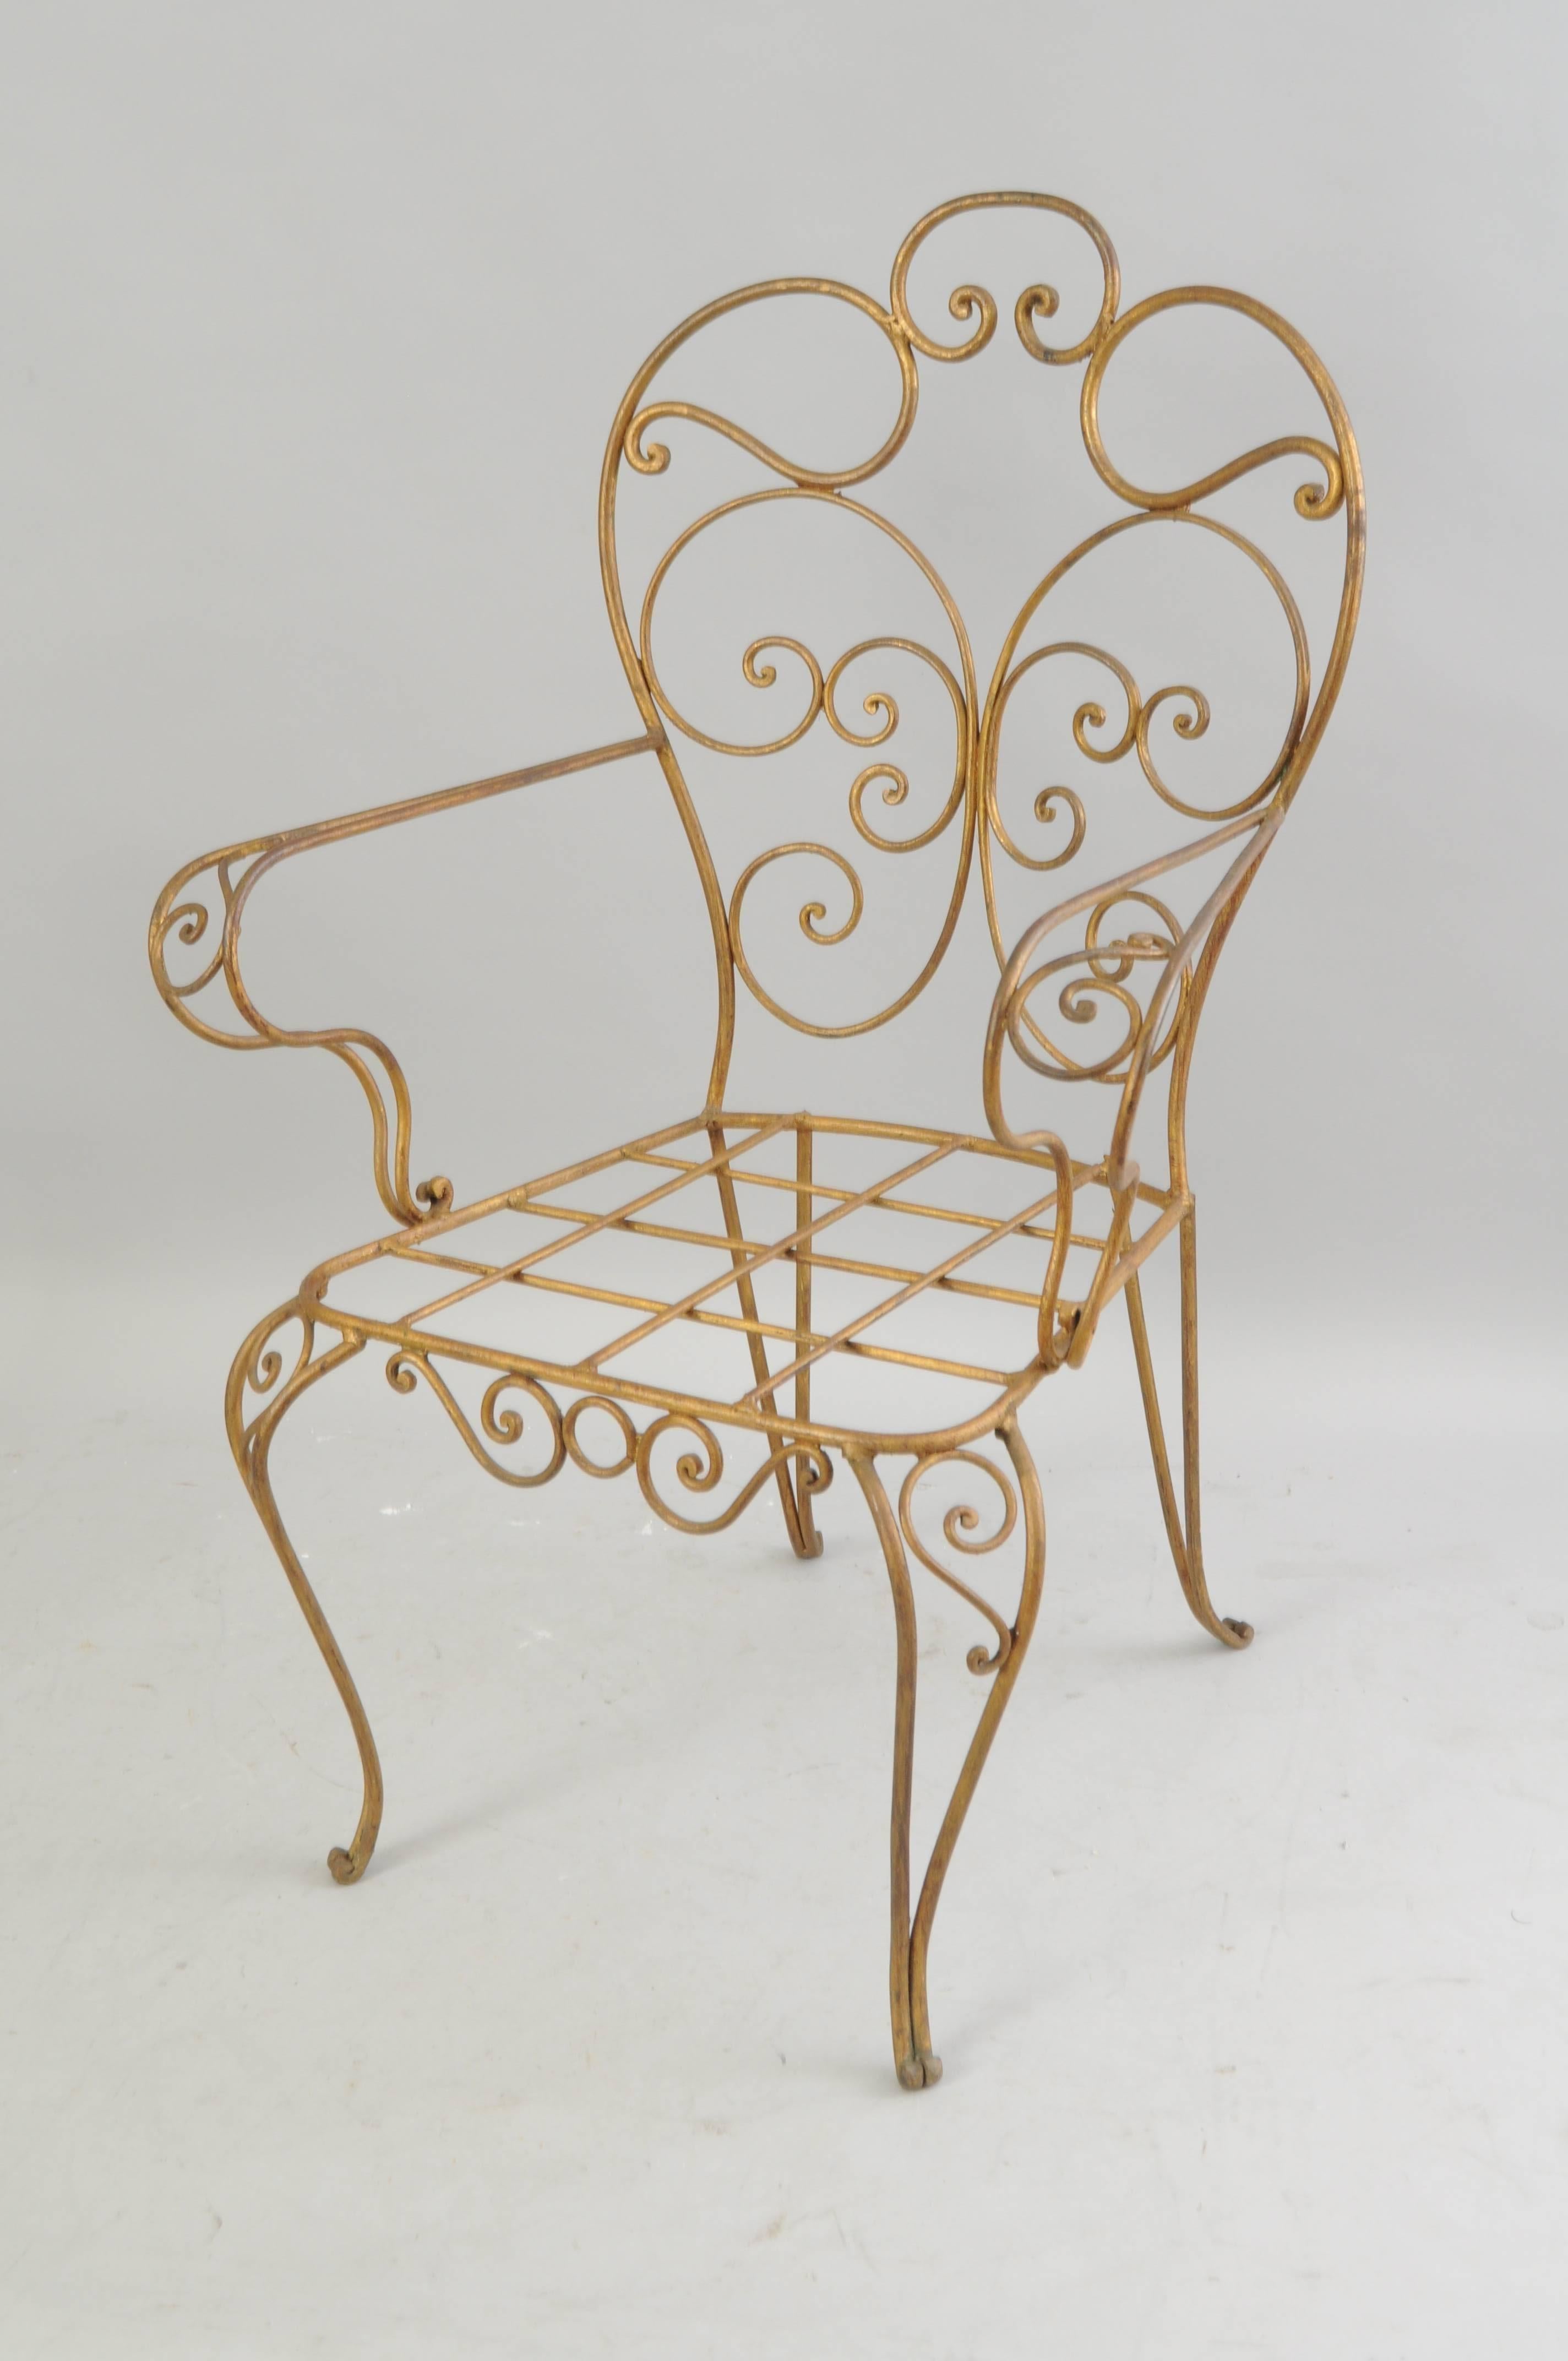 Set of four vintage Italian gold gilt iron arm chairs. Chairs feature ornate scroll-work frames, cabriole legs, cross thatched seats, and beautiful antiqued gold gilt finish to the iron frames. Great to add loose seat cushions.